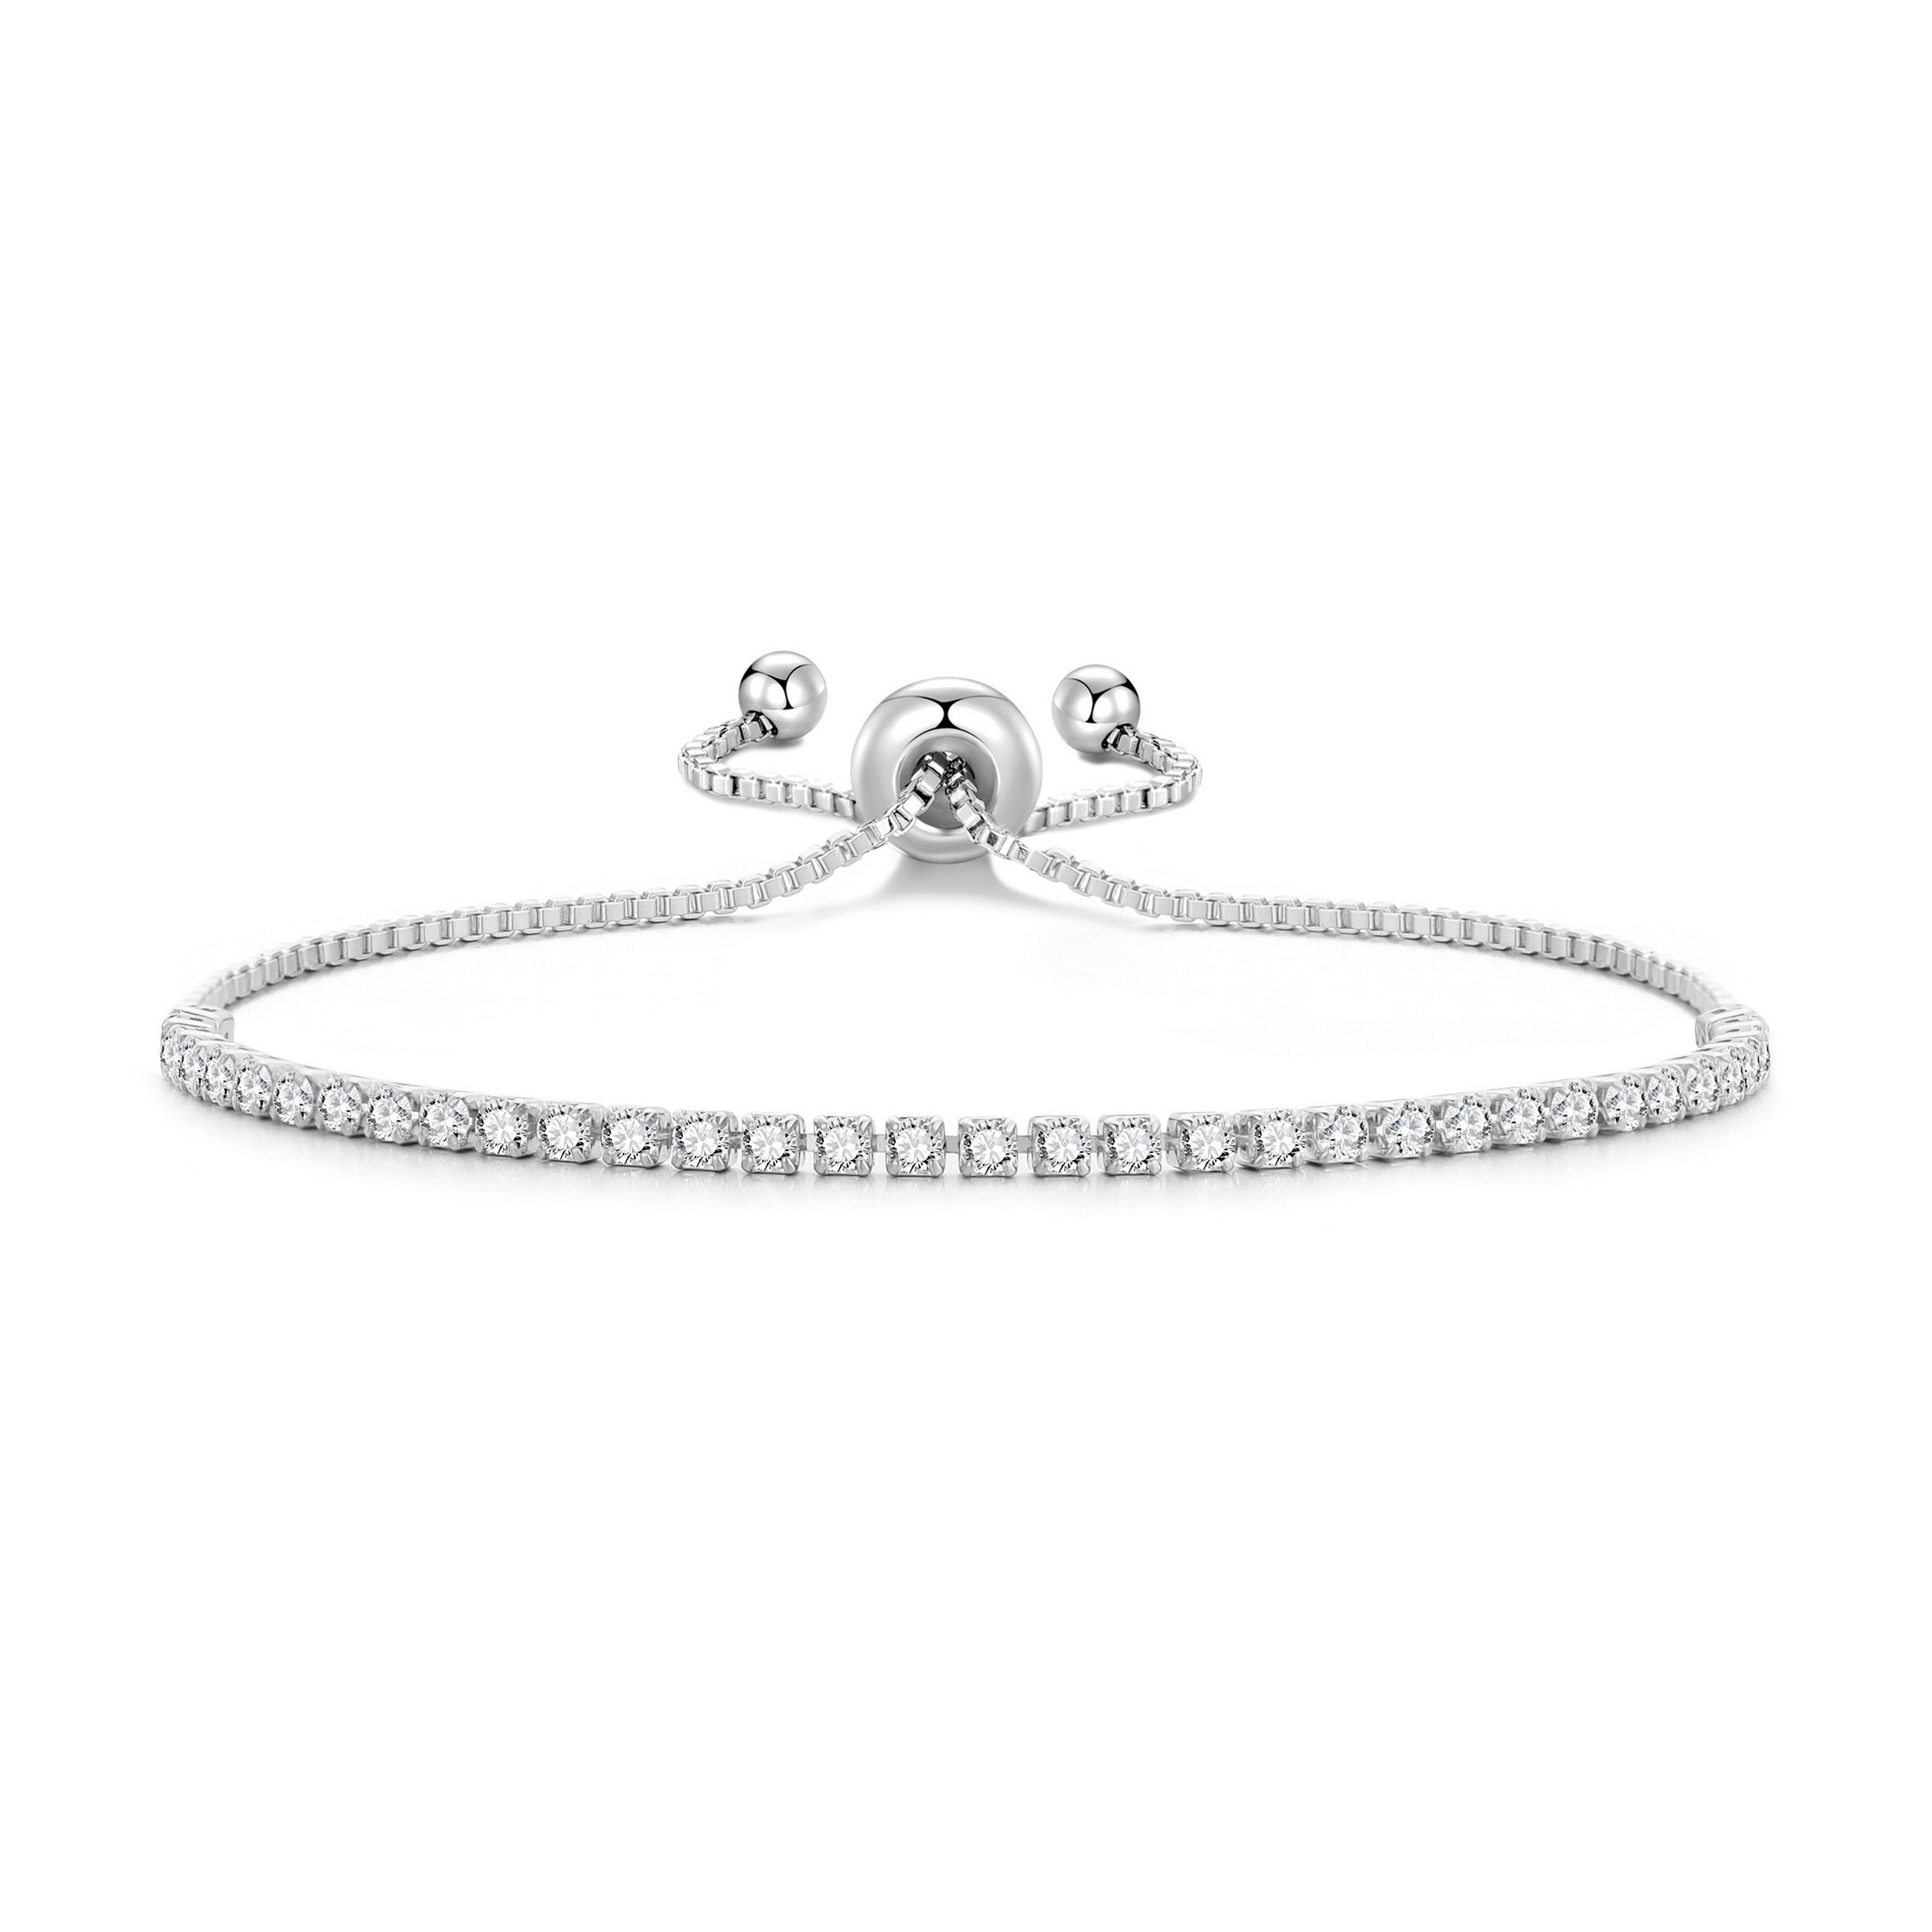 Silver Plated 2mm Adjustable Tennis Bracelet Created with Zircondia® Crystals